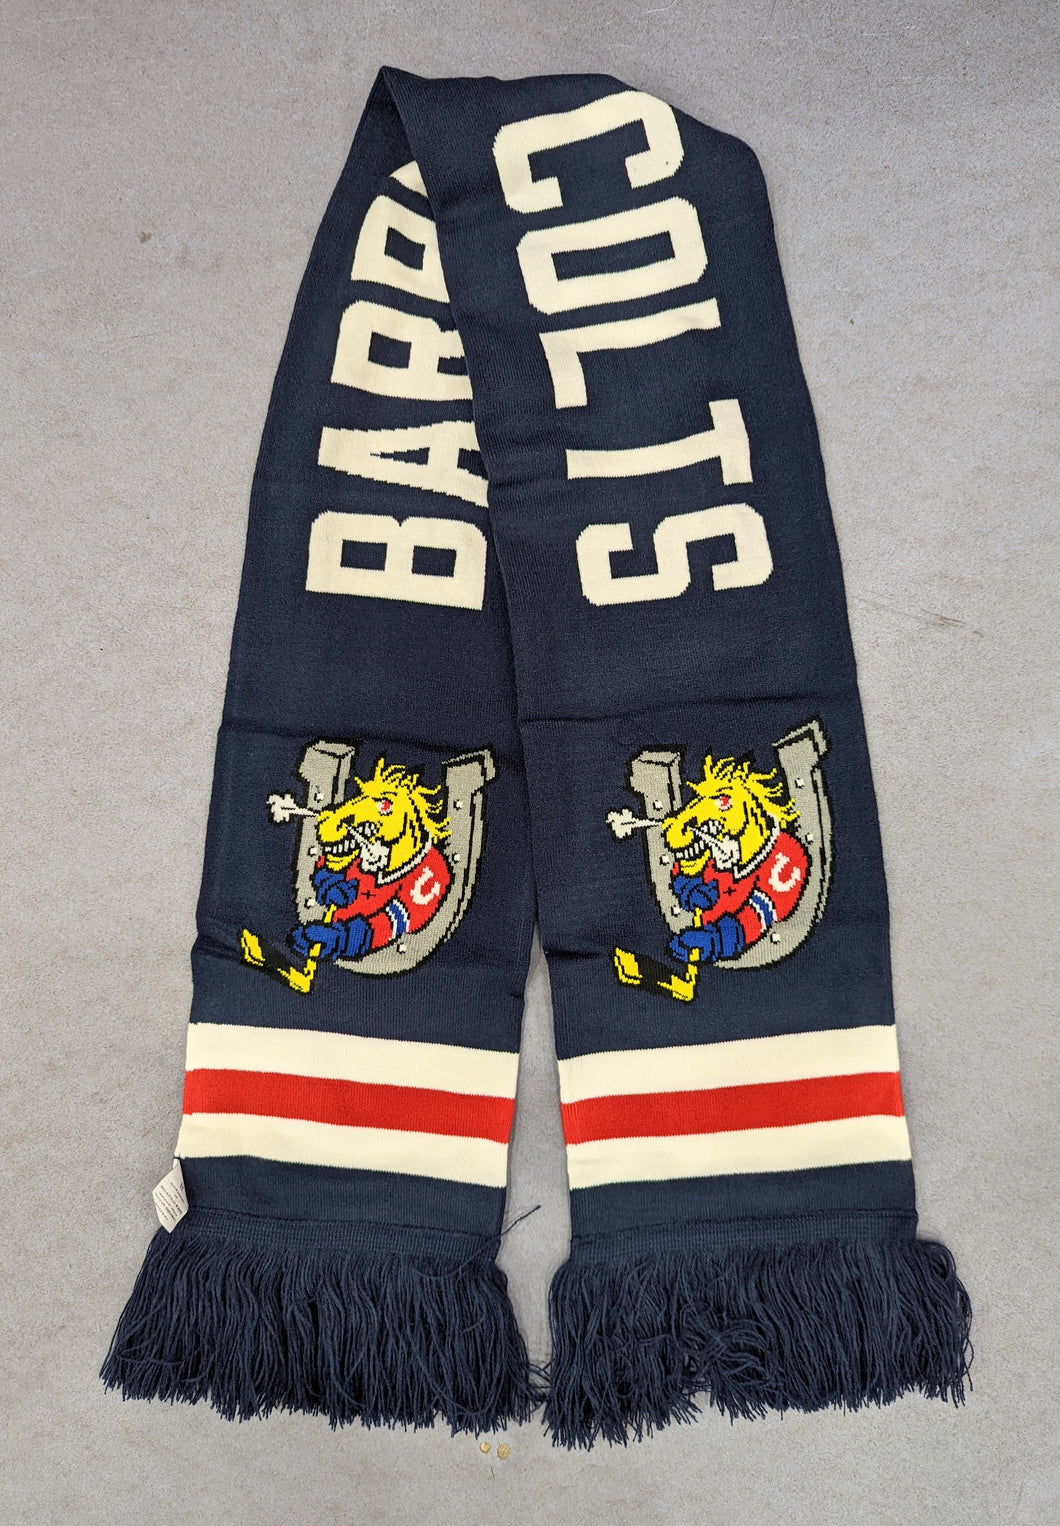 Barrie Colts Scarf